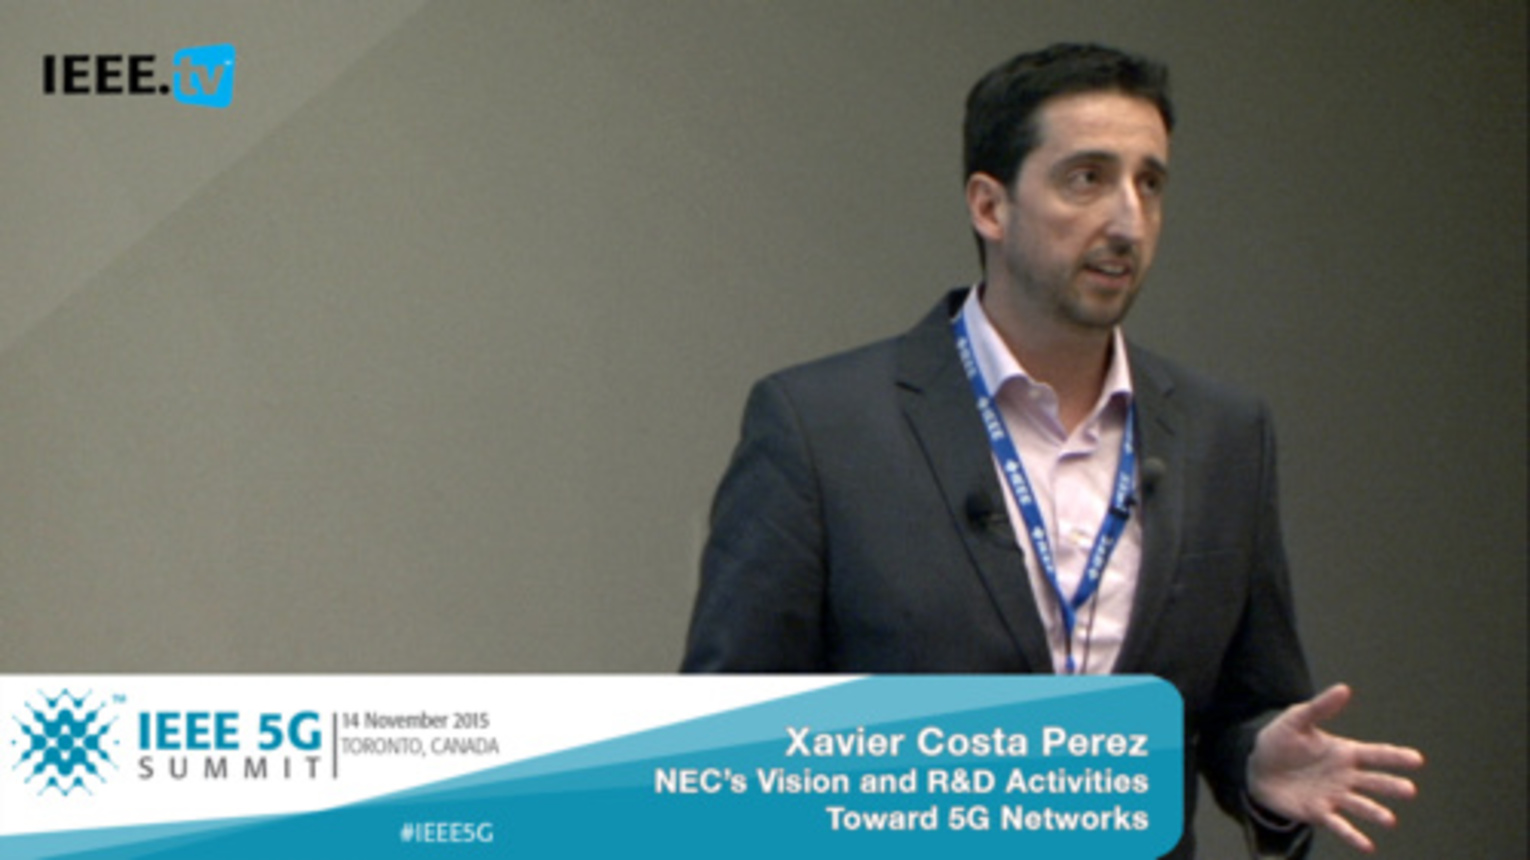 Toronto 5G Summit - 2015 - NEC's Vision and R&D Activities: Toward 5G Networks